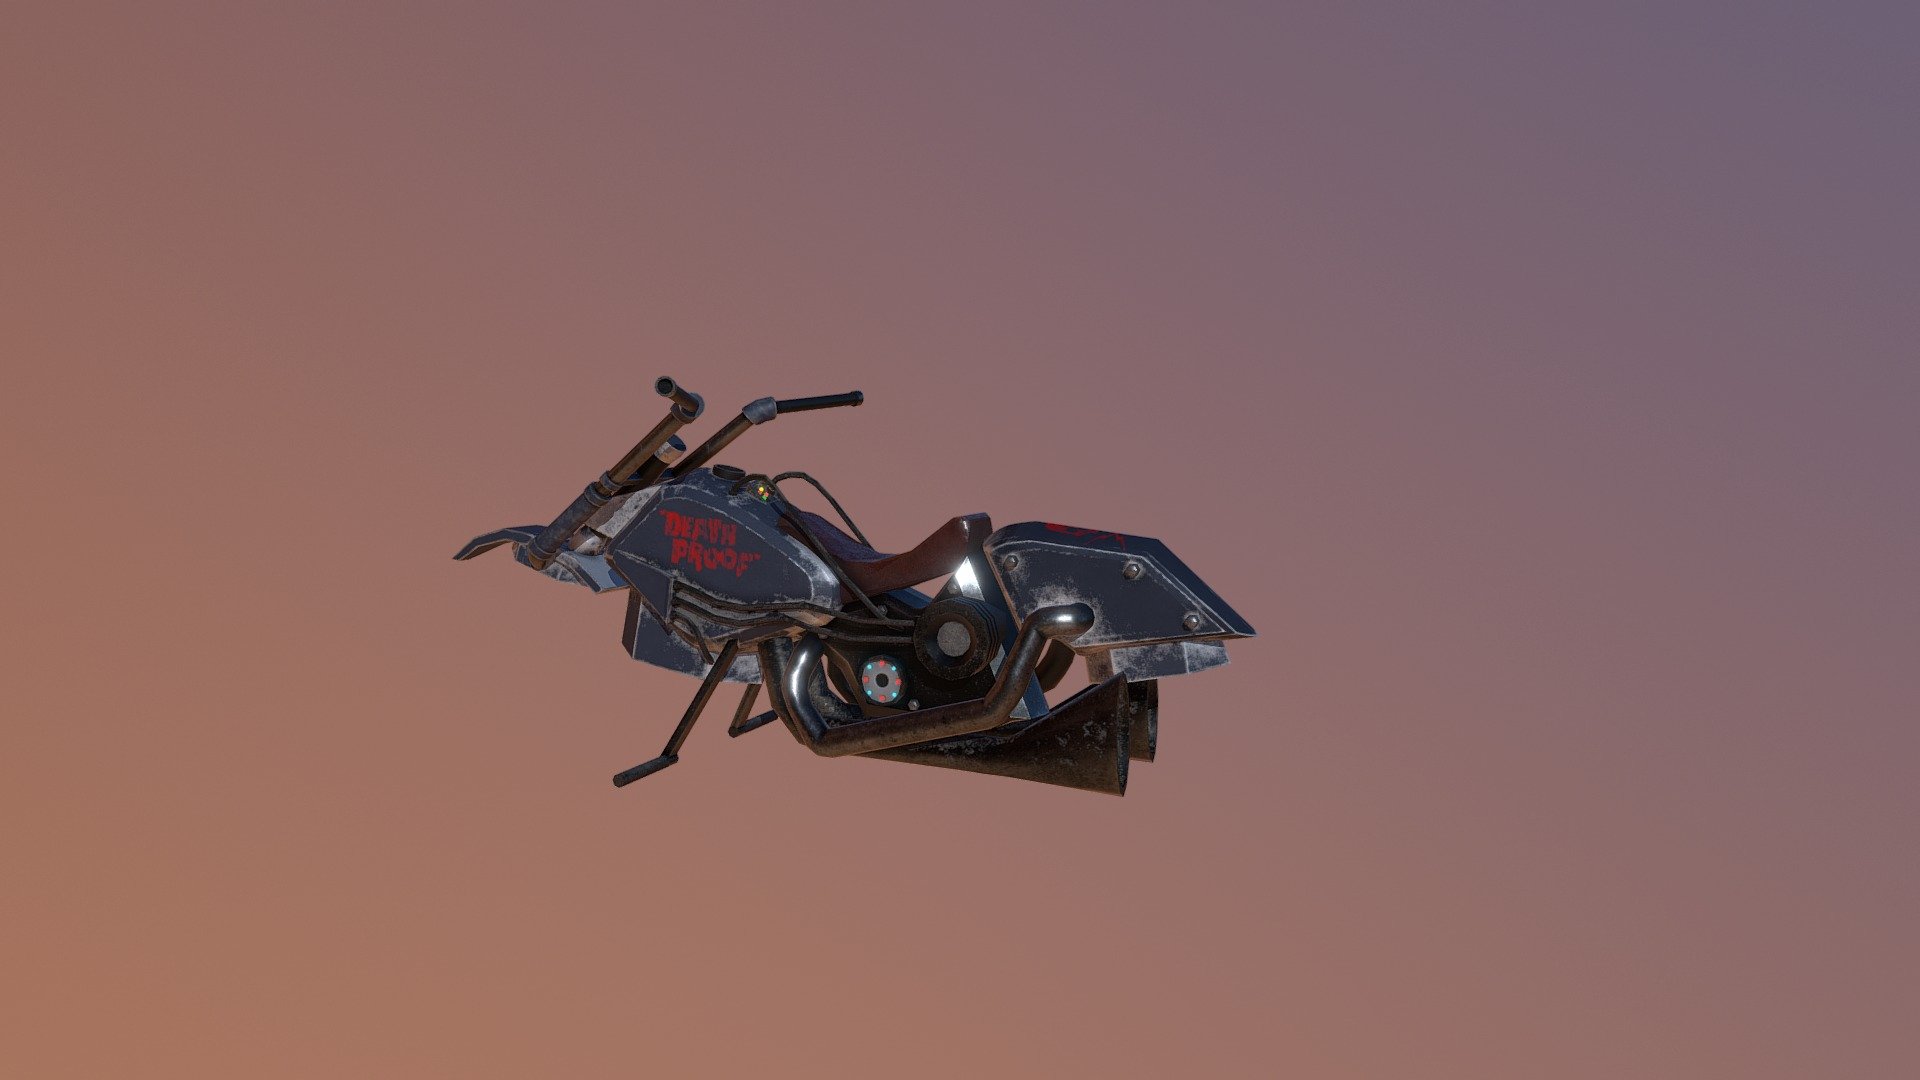 Hoverbike "Death Proof"